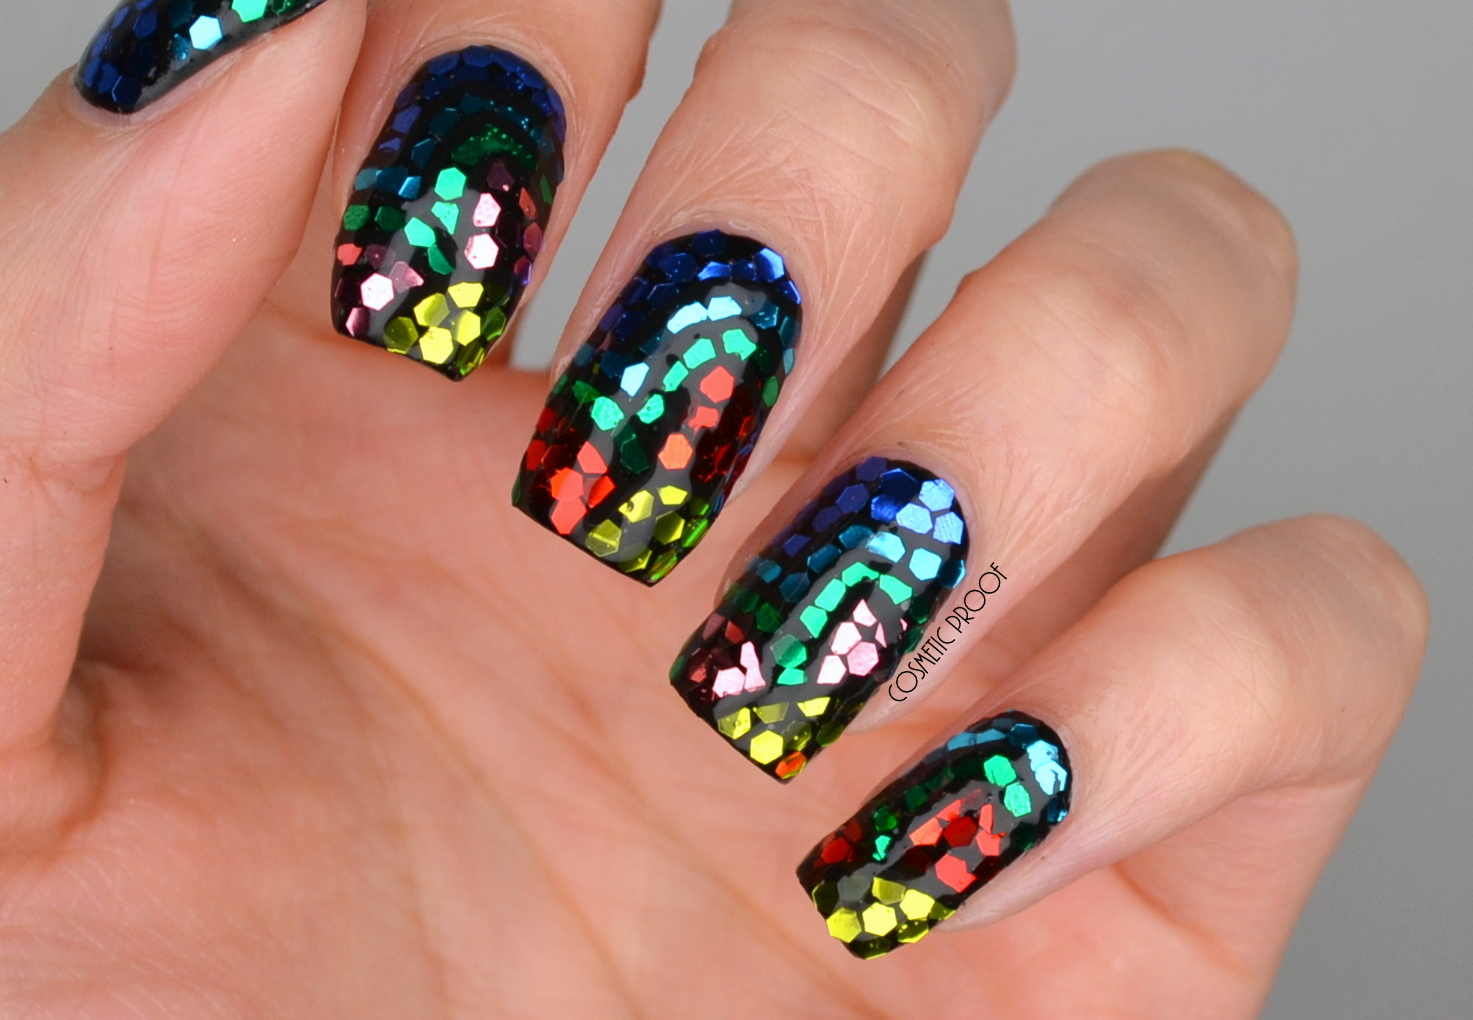 1. Stained Glass Nail Art Design - wide 4